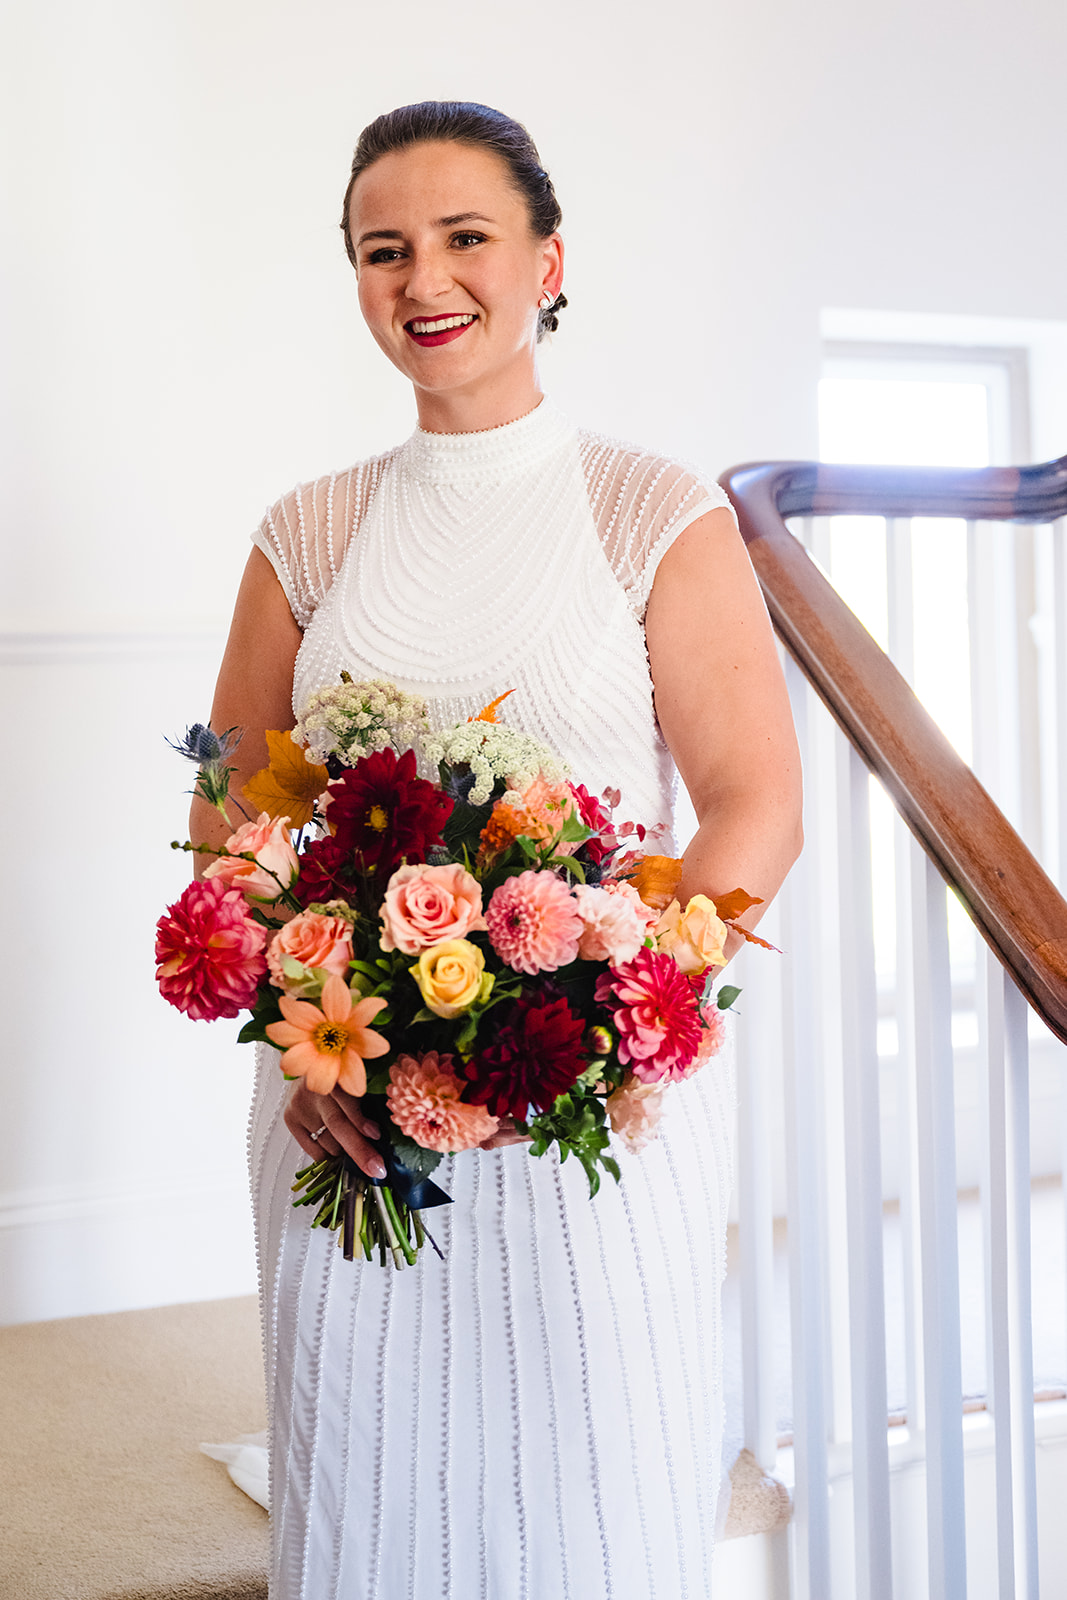 Bride standing on the staircase at home with her bright wedding bouquet